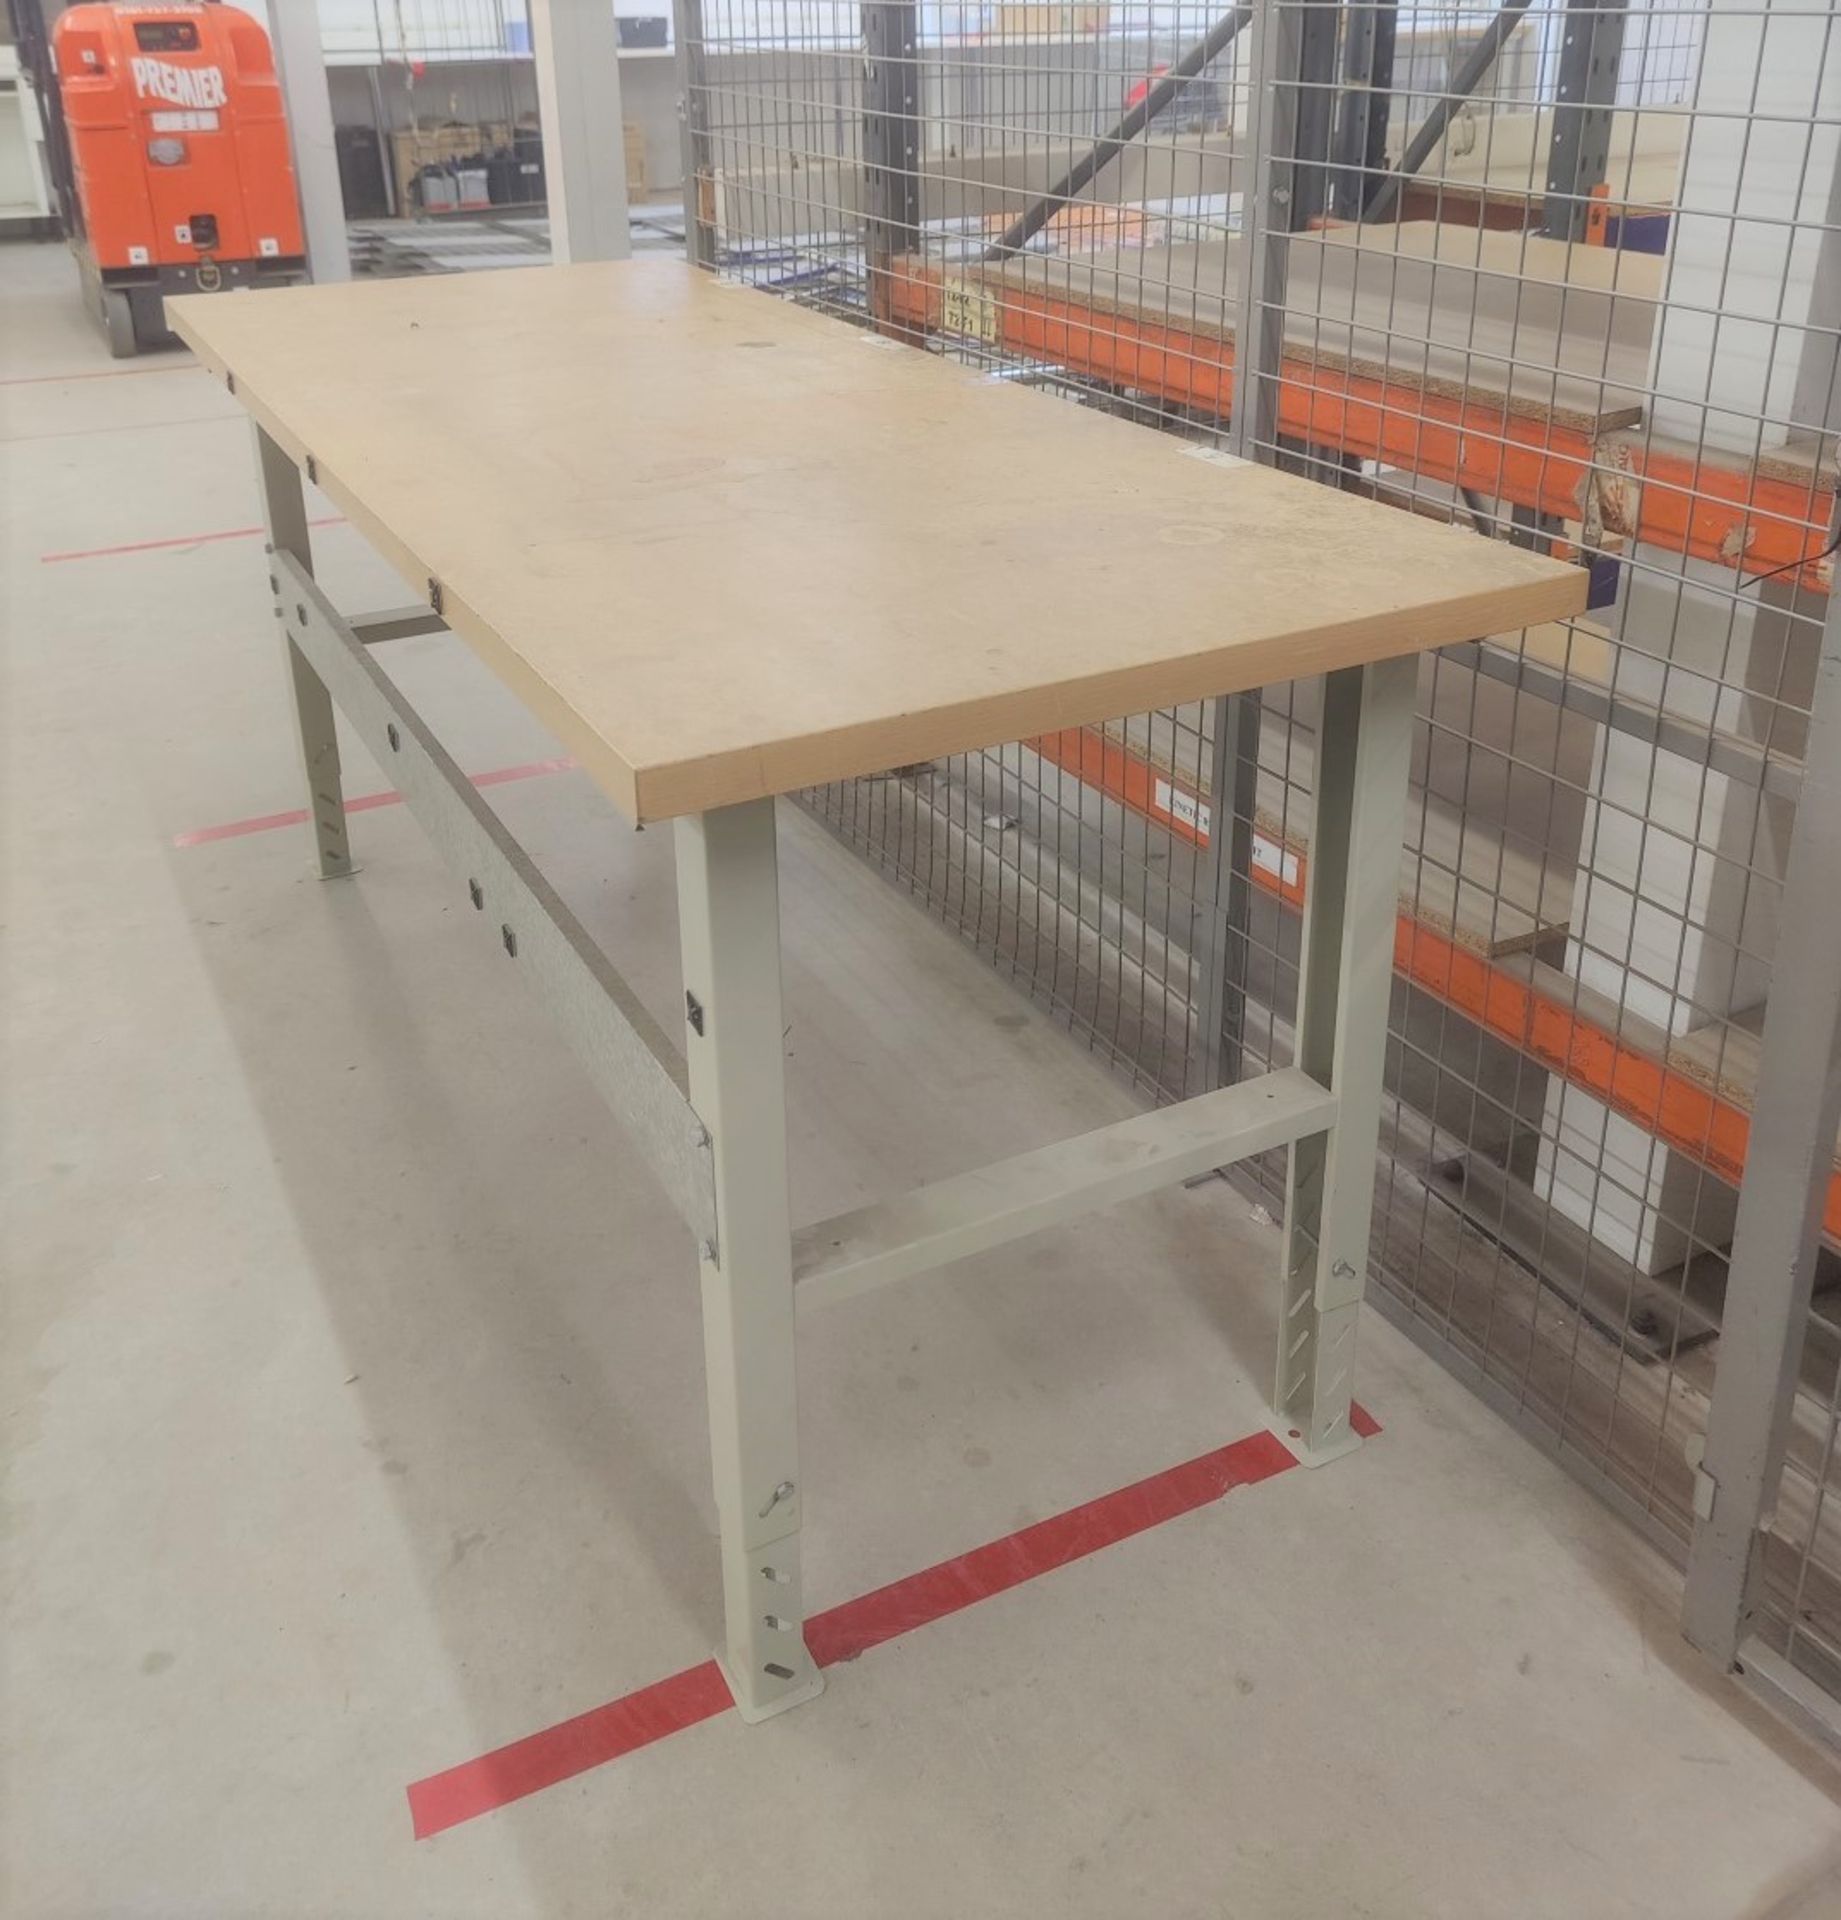 1 x Workbench With Height Adjustable Legs - Removed From a Computer Workshop - Size: W200 x D80 cms - Image 3 of 6